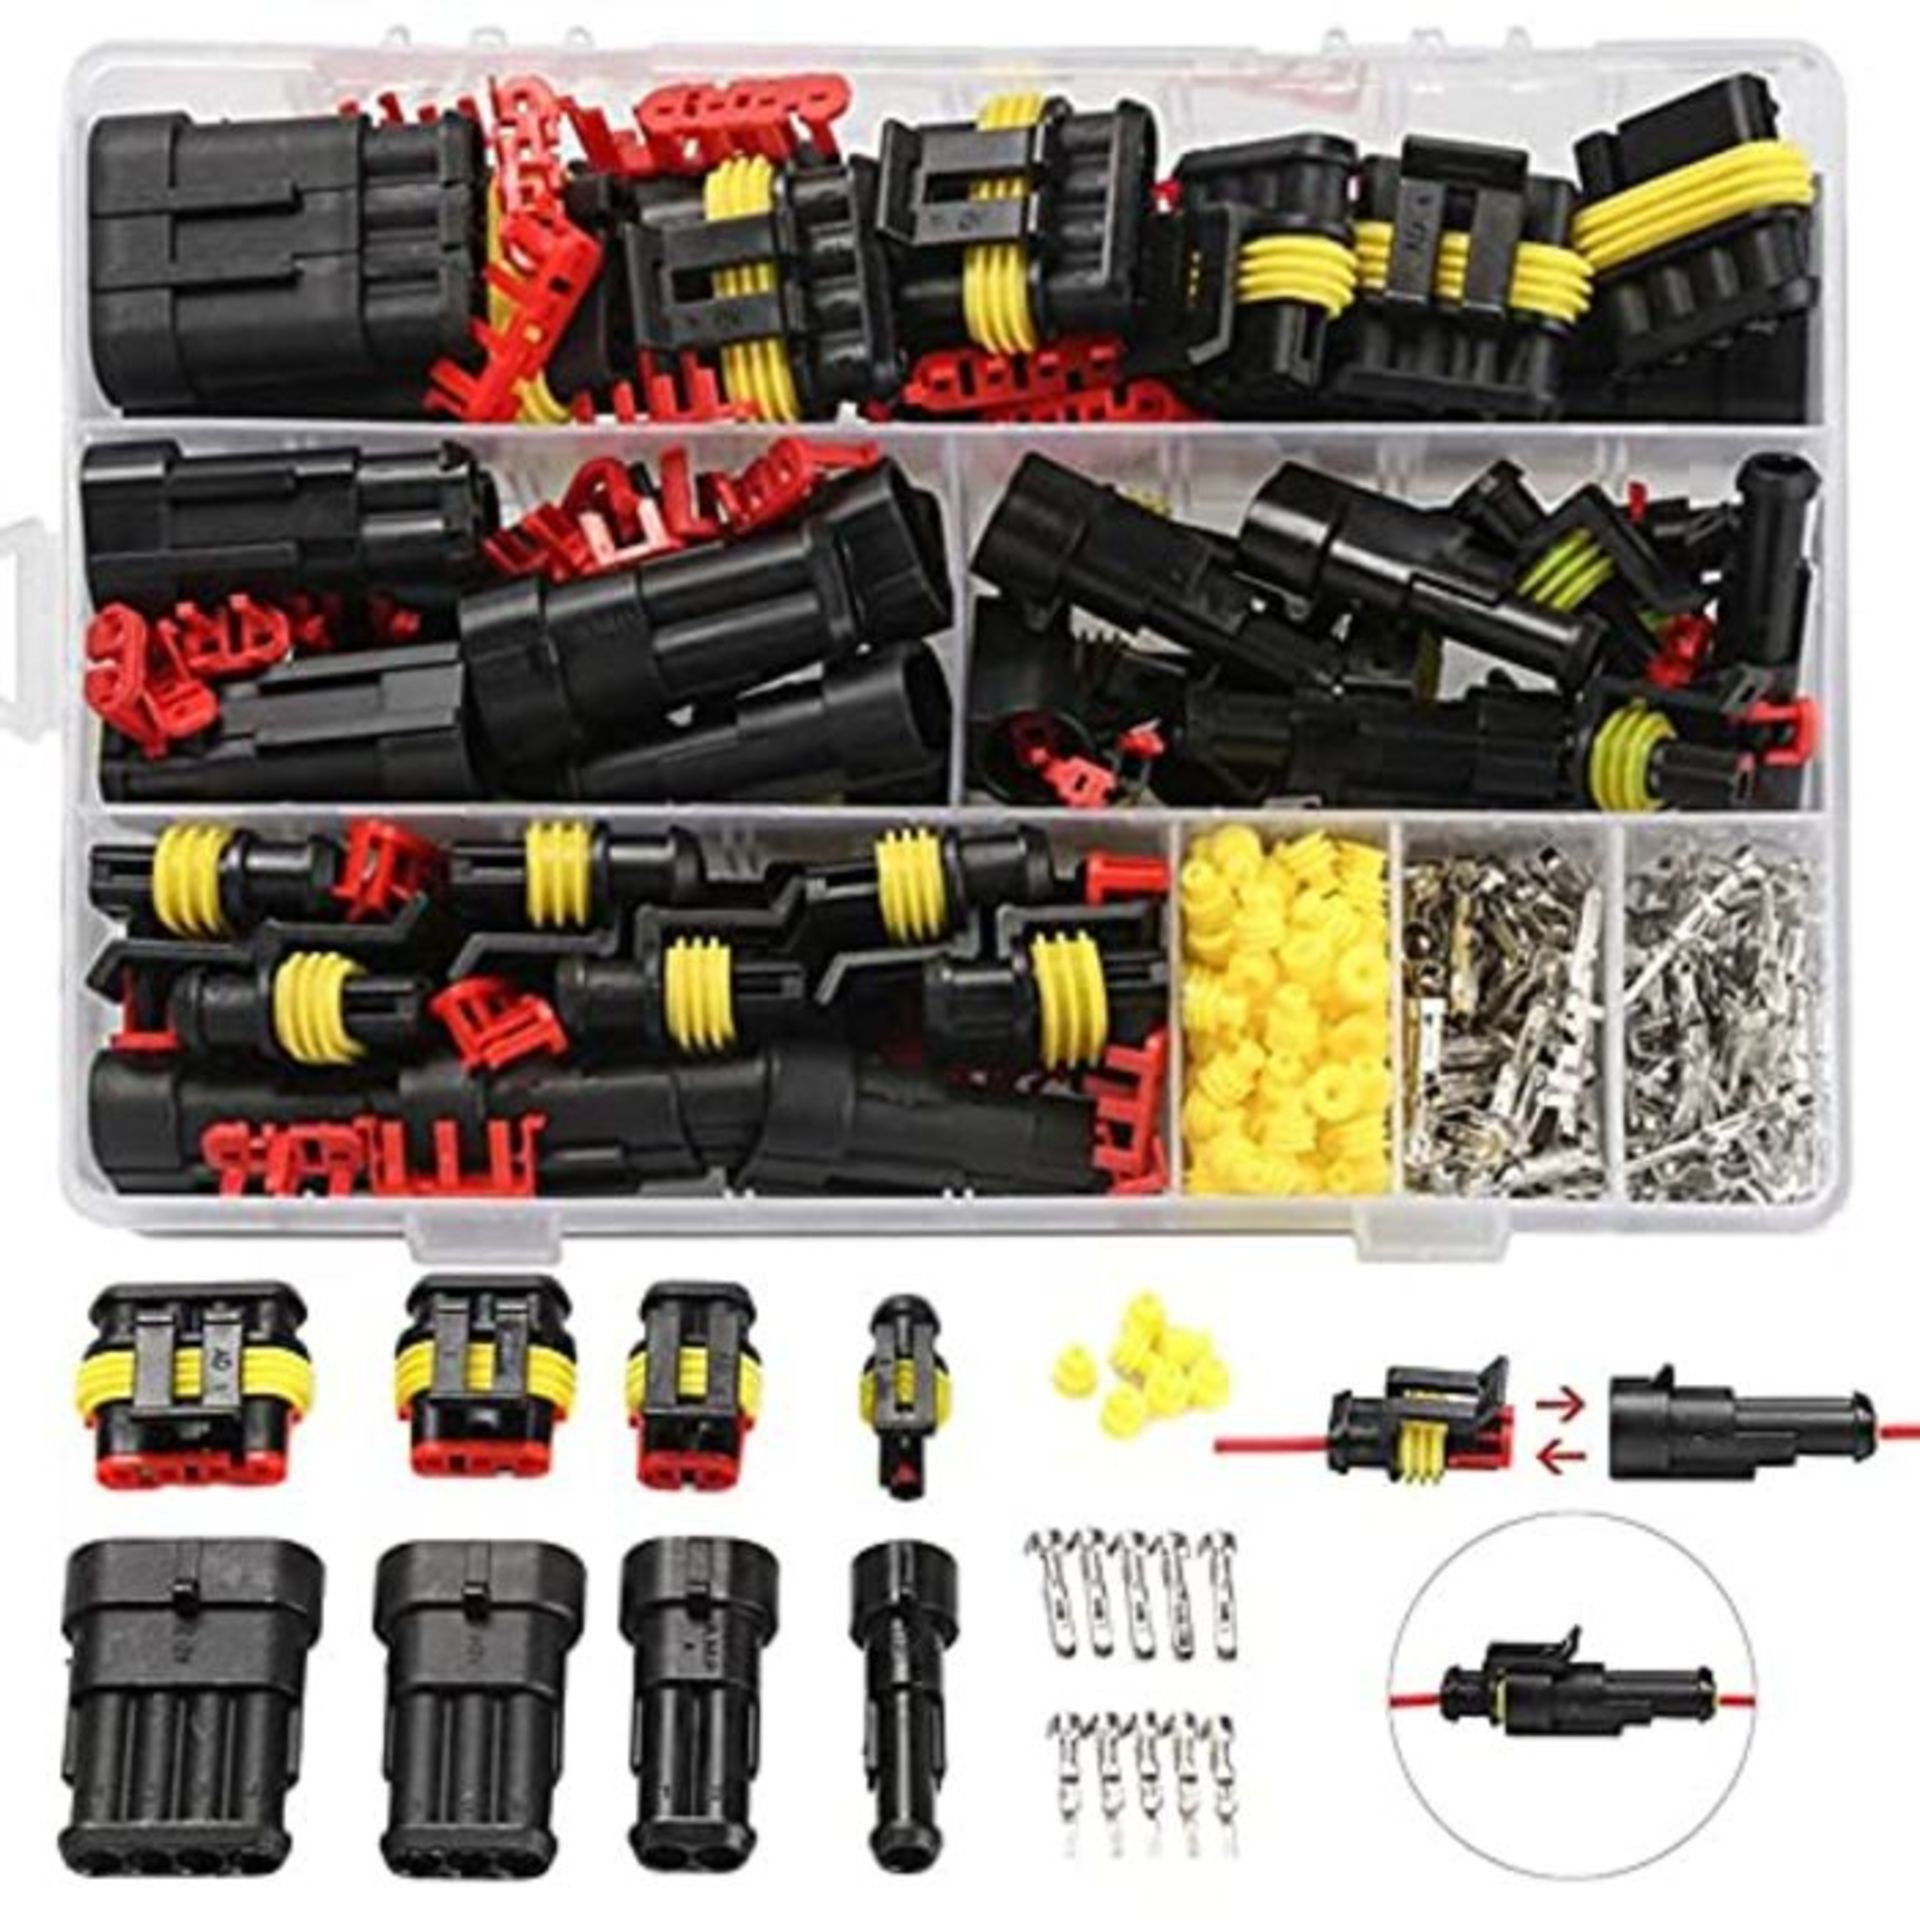 COMBINED RRP £463.00 LOT TO CONTAIN 43 ASSORTED Automotive: AstroAI, Nicoman, Iron, Set, Set, S - Image 10 of 31